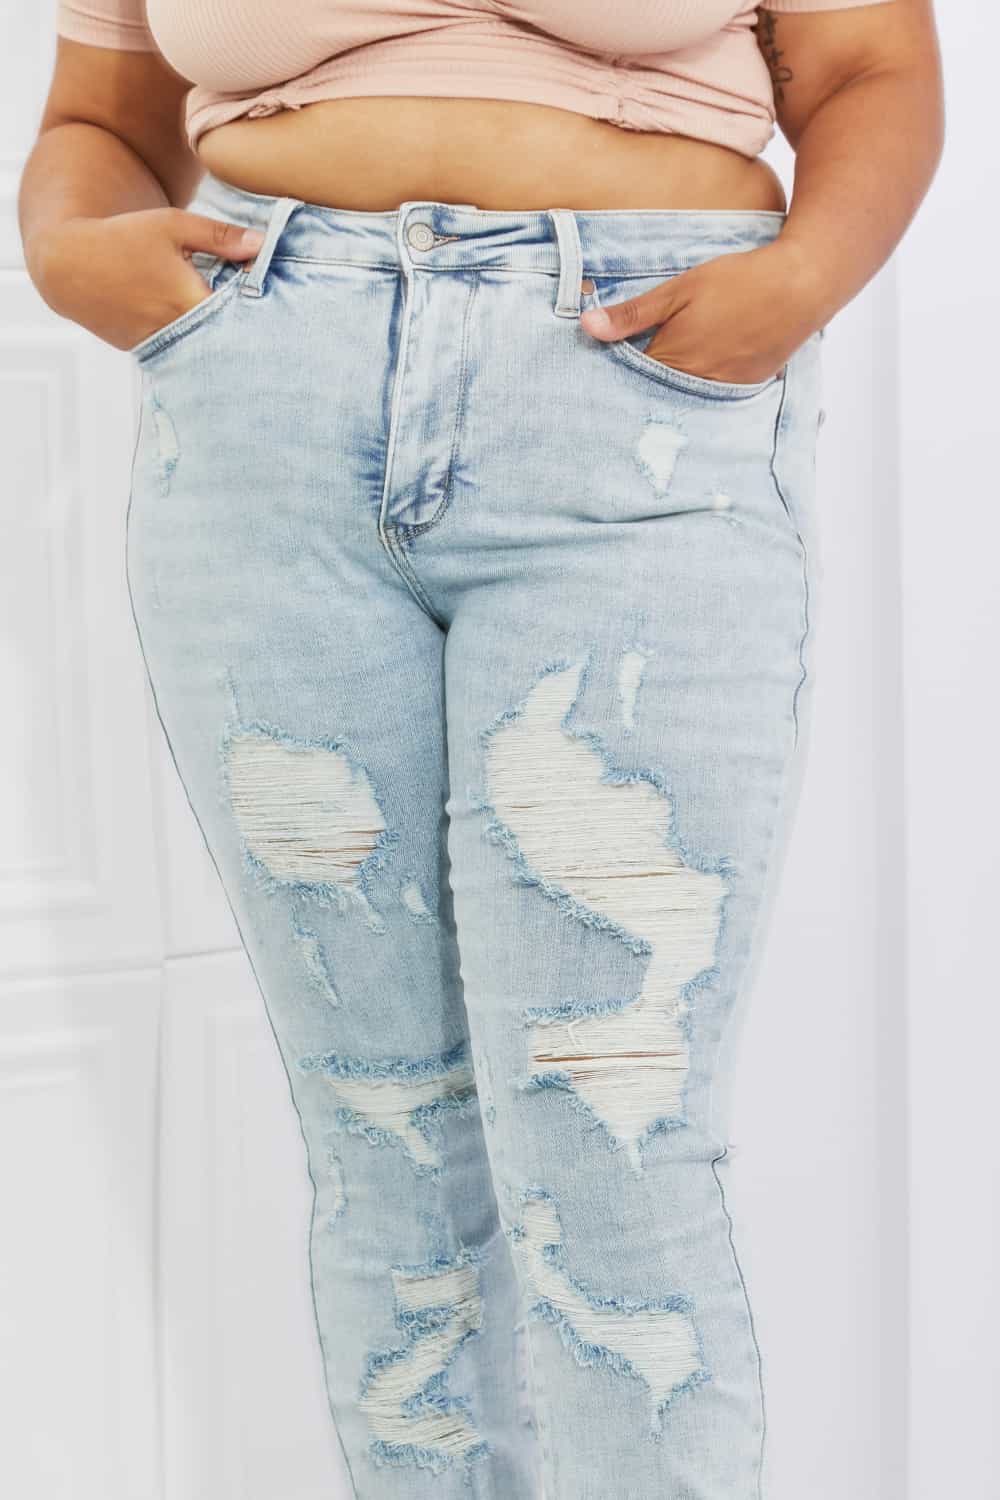 Judy Blue Tiana Full Size High Waisted Distressed Skinny Jeans - Cheeky Chic Boutique